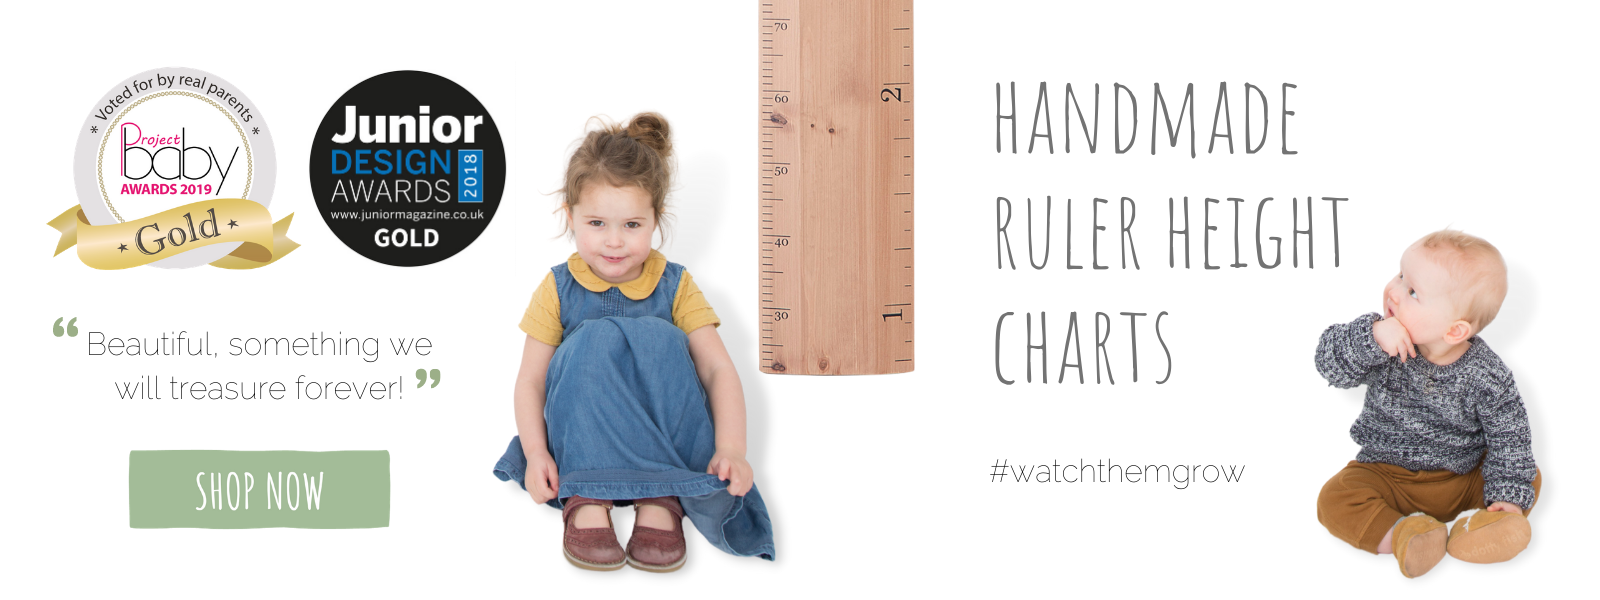 Handmade wooden Ruler Height Charts as seen in Stacey Solomon and Mrs Hinch